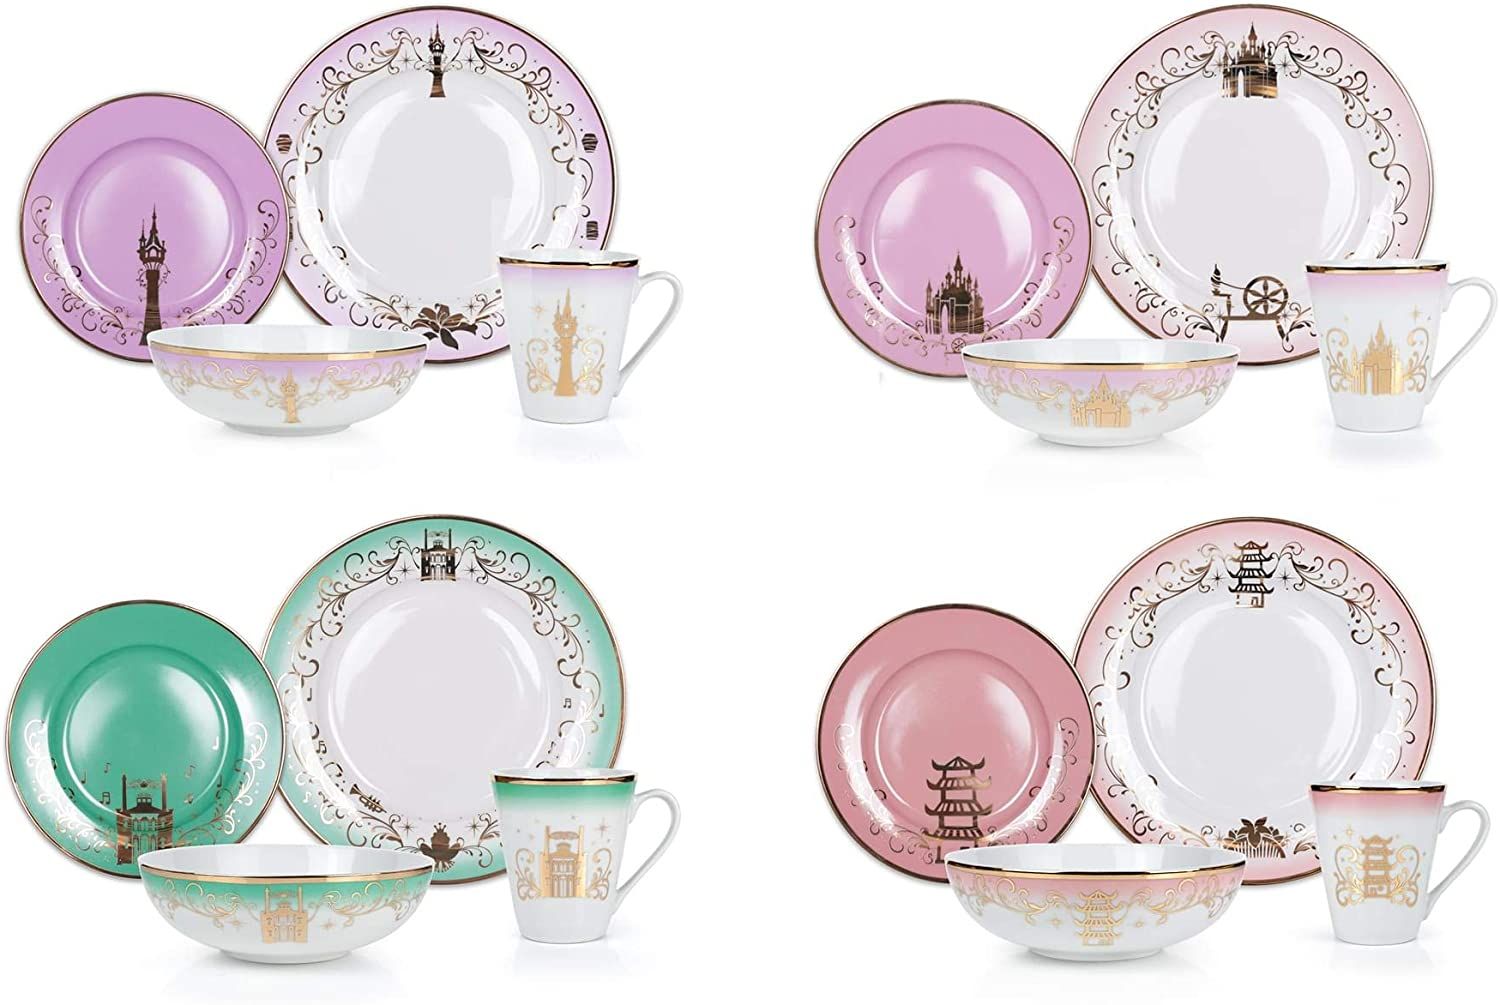 Disney Dinnerware is one of the best Disney collectibles